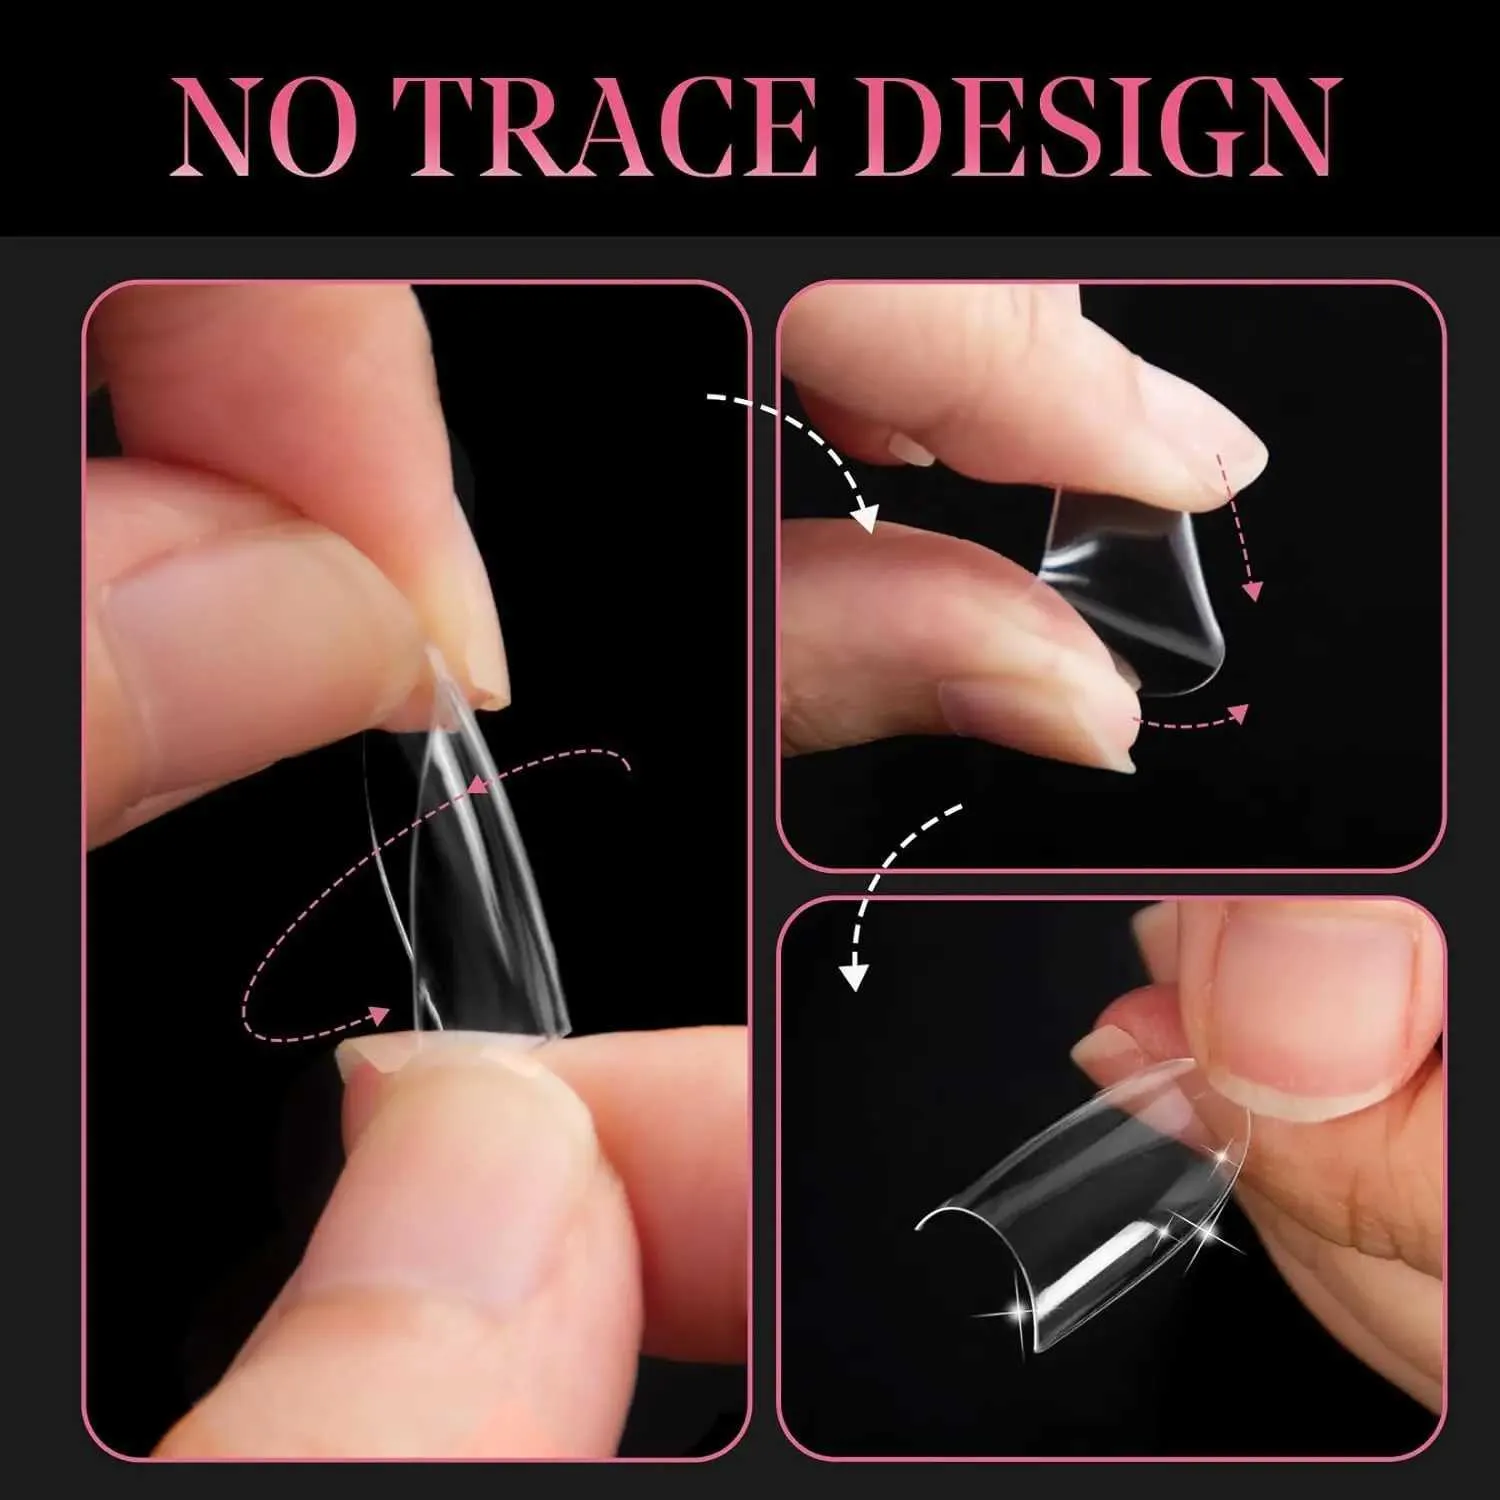 YELGO Artificial Curve Fake Nails with Glue white White - Price in India,  Buy YELGO Artificial Curve Fake Nails with Glue white White Online In  India, Reviews, Ratings & Features | Flipkart.com